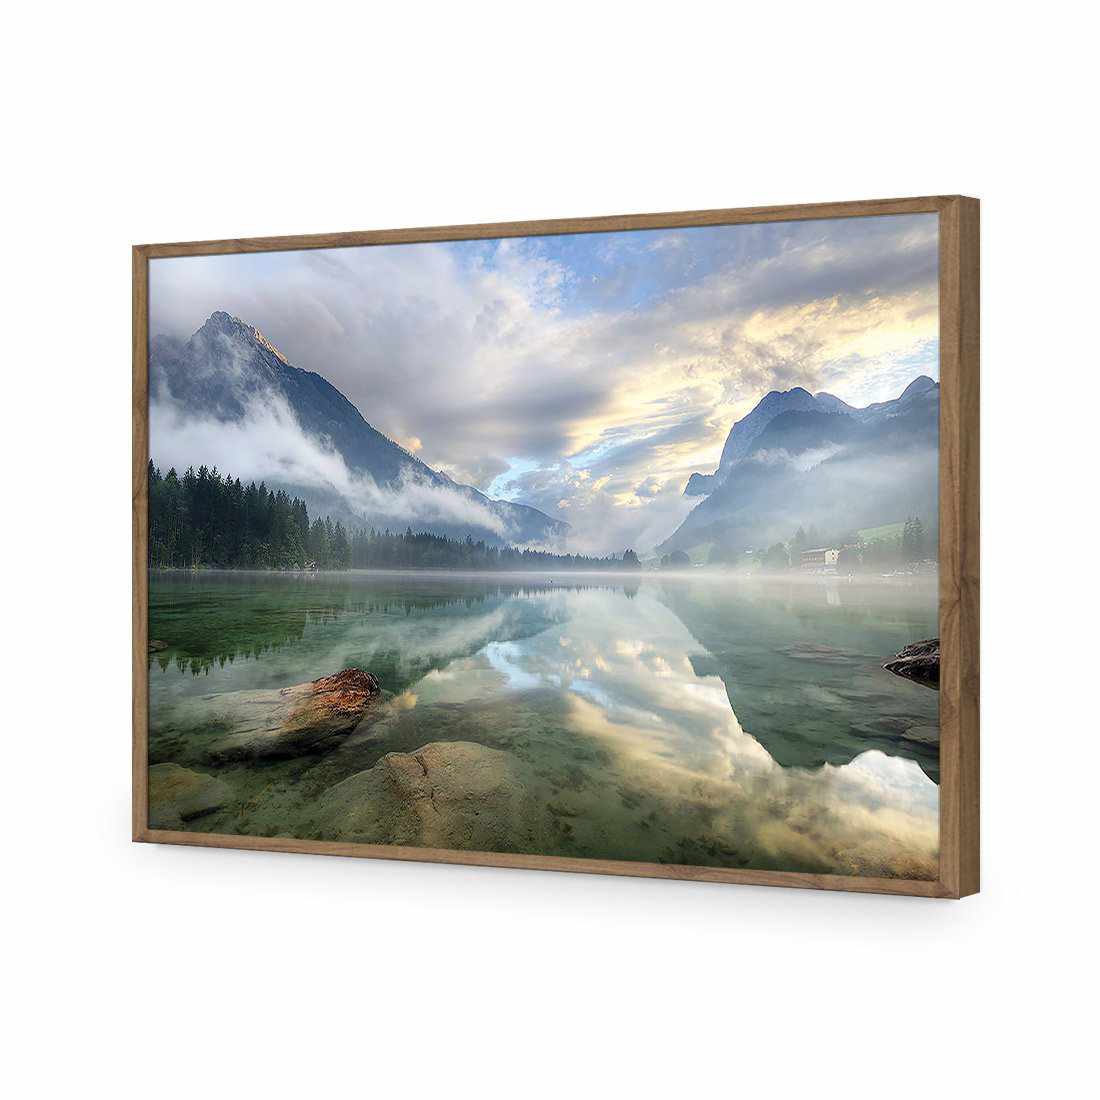 Misty Mountain Lake-Acrylic-Wall Art Design-Without Border-Acrylic - Natural Frame-45x30cm-Wall Art Designs